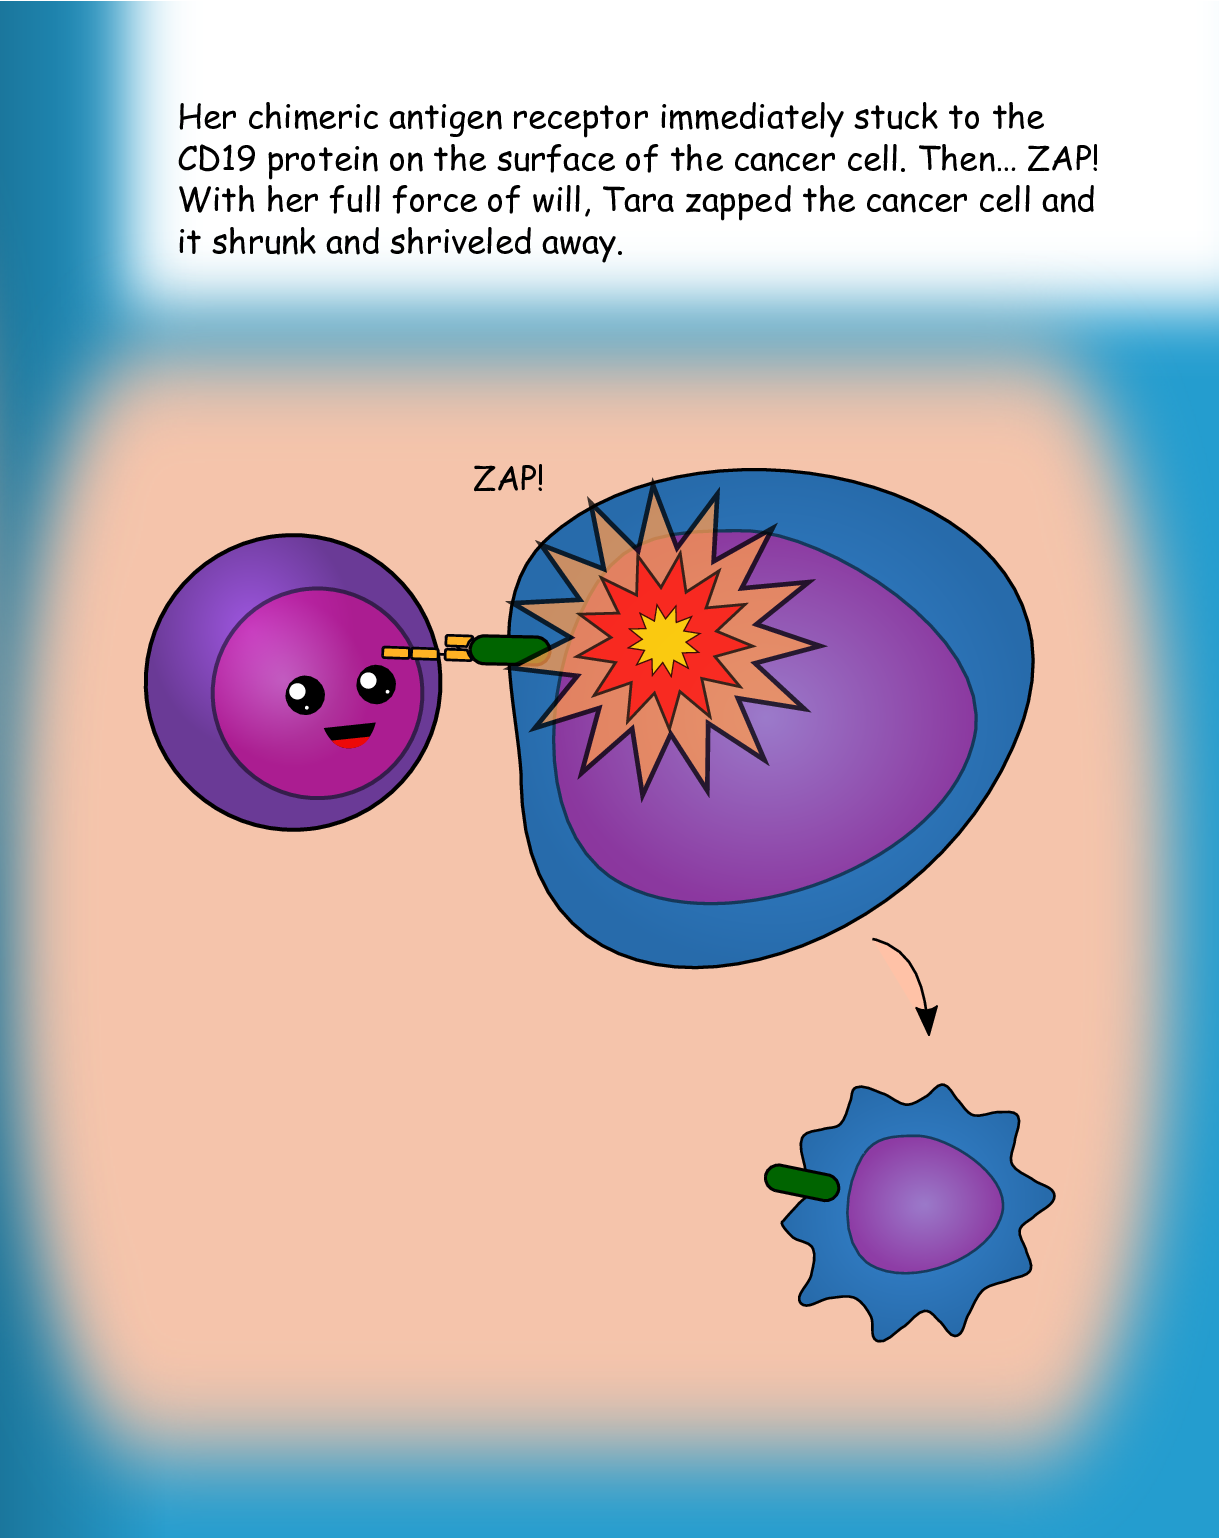 Page 23 (Cancer Cell Killing)